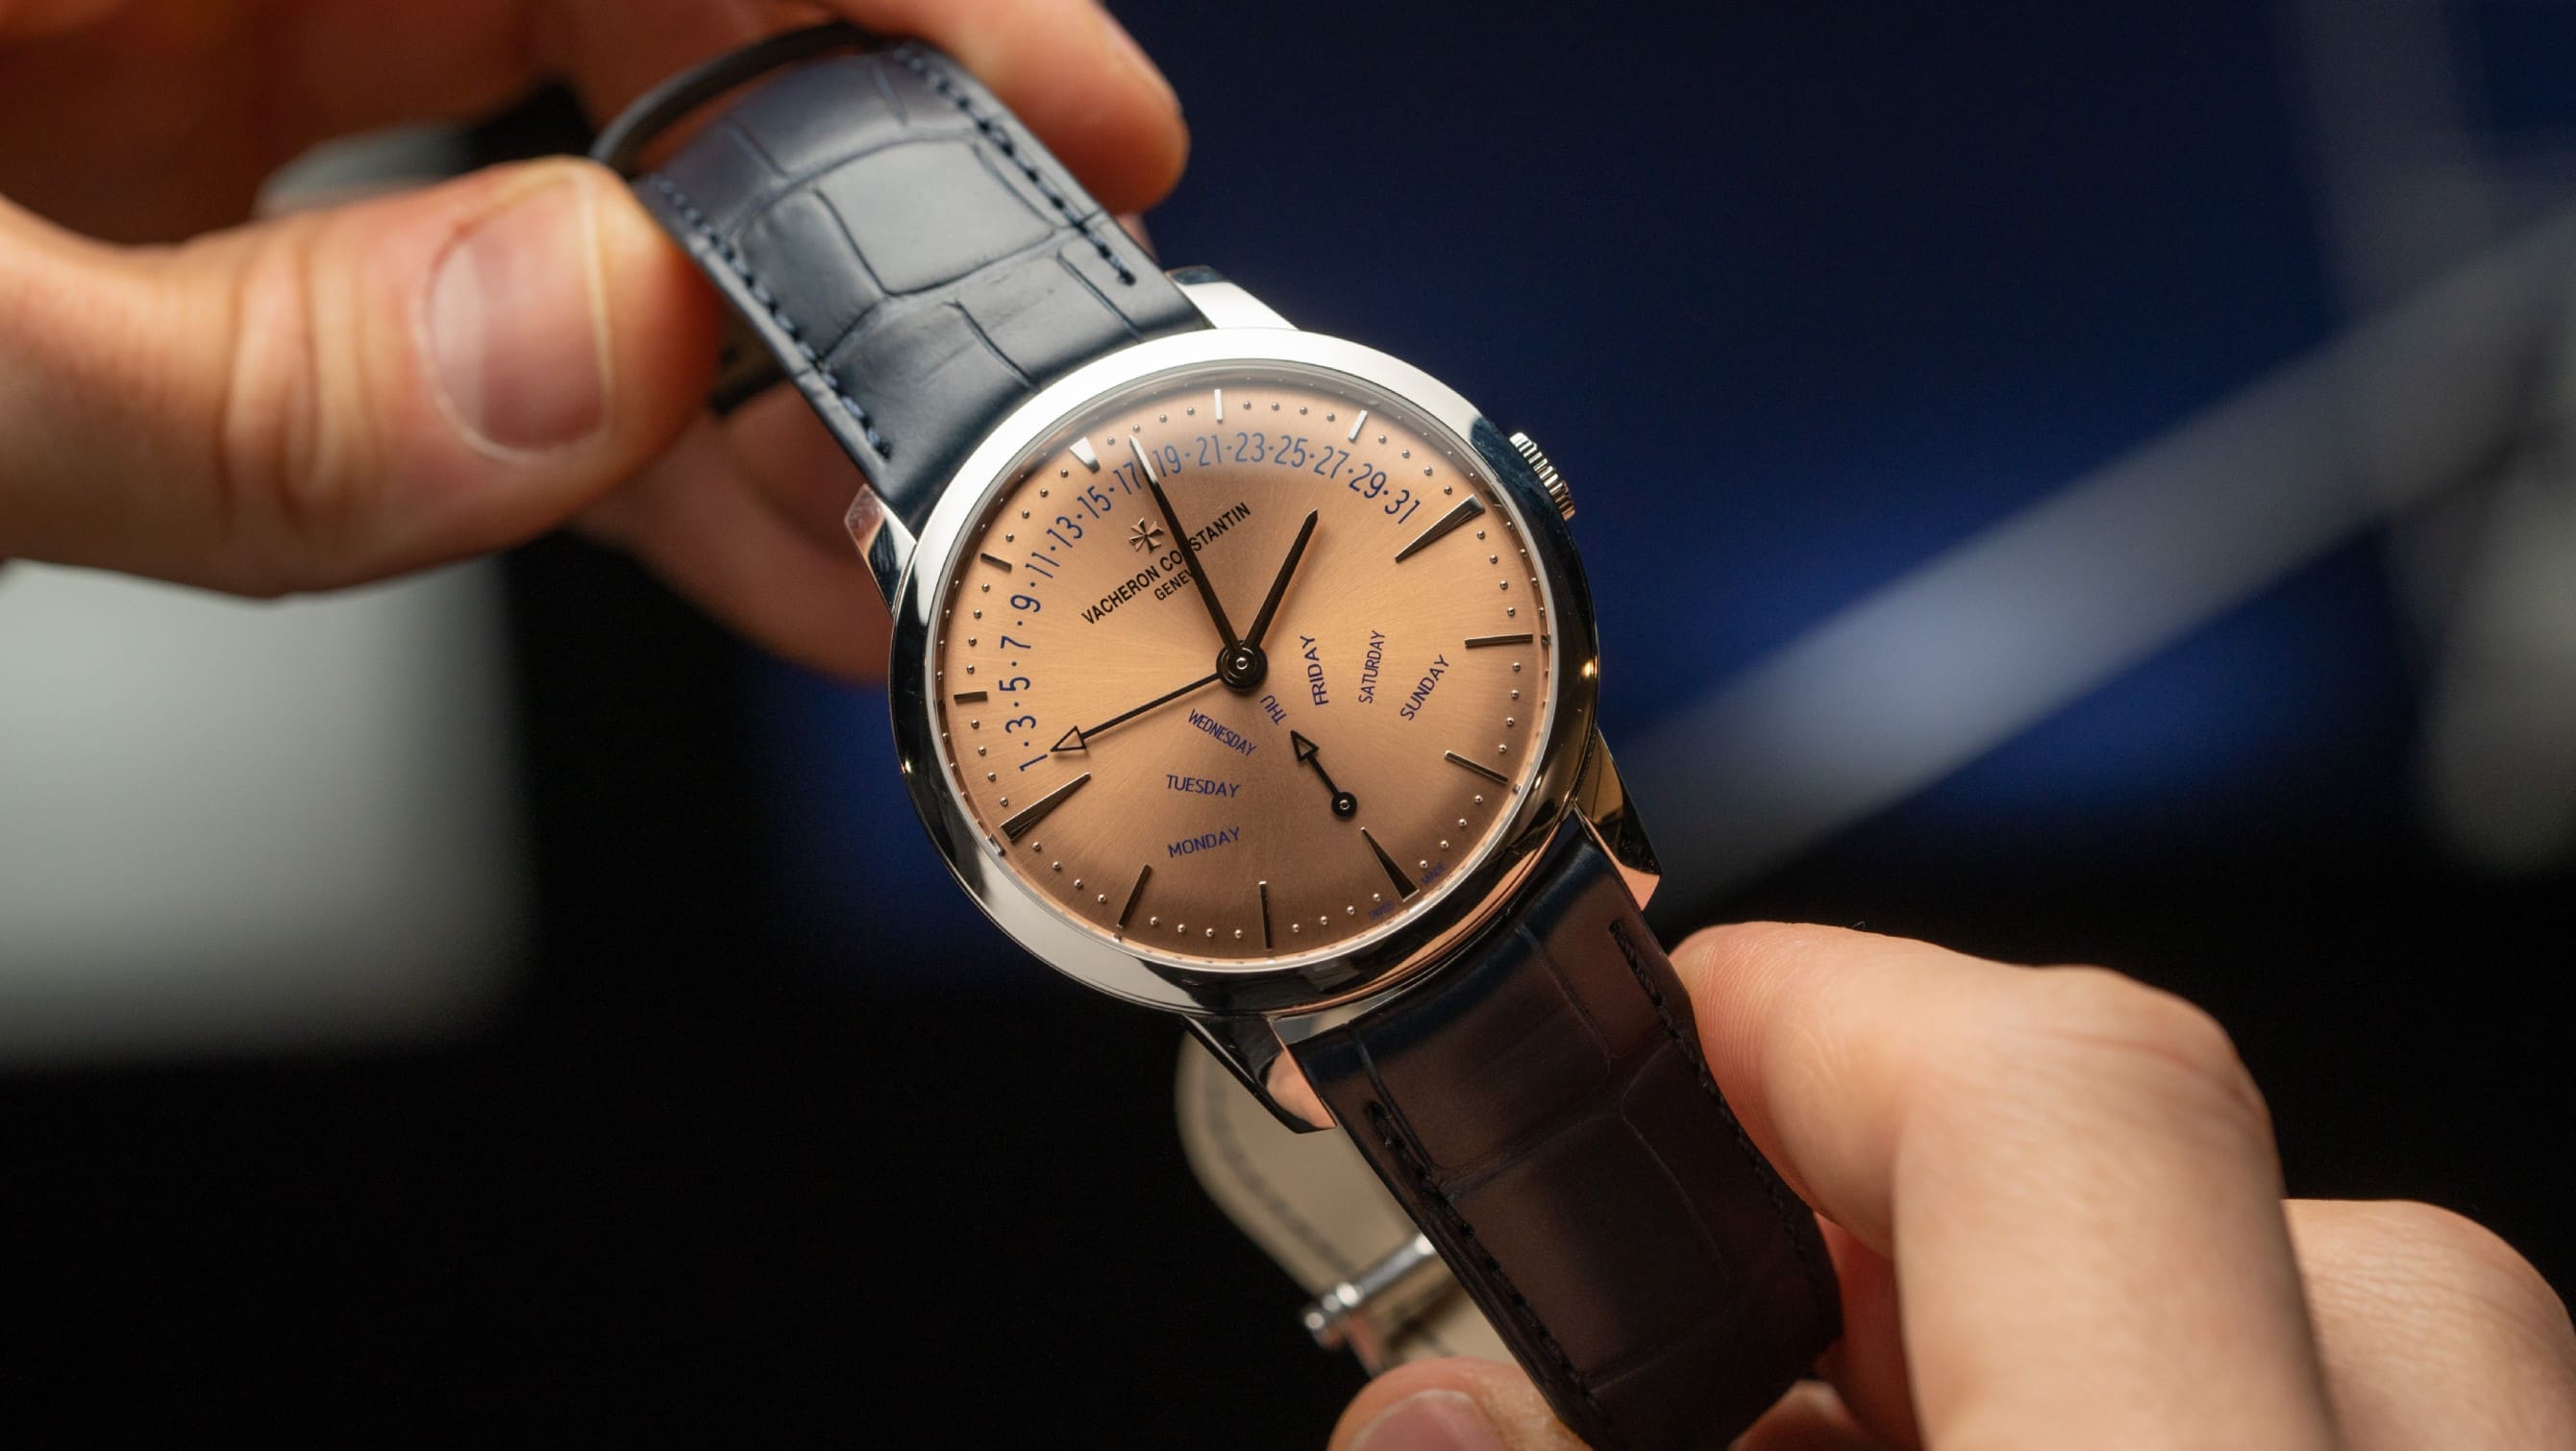 The Vacheron Constantin Patrimony Retrograde Day-Date is vying for the stealth-wealth crown